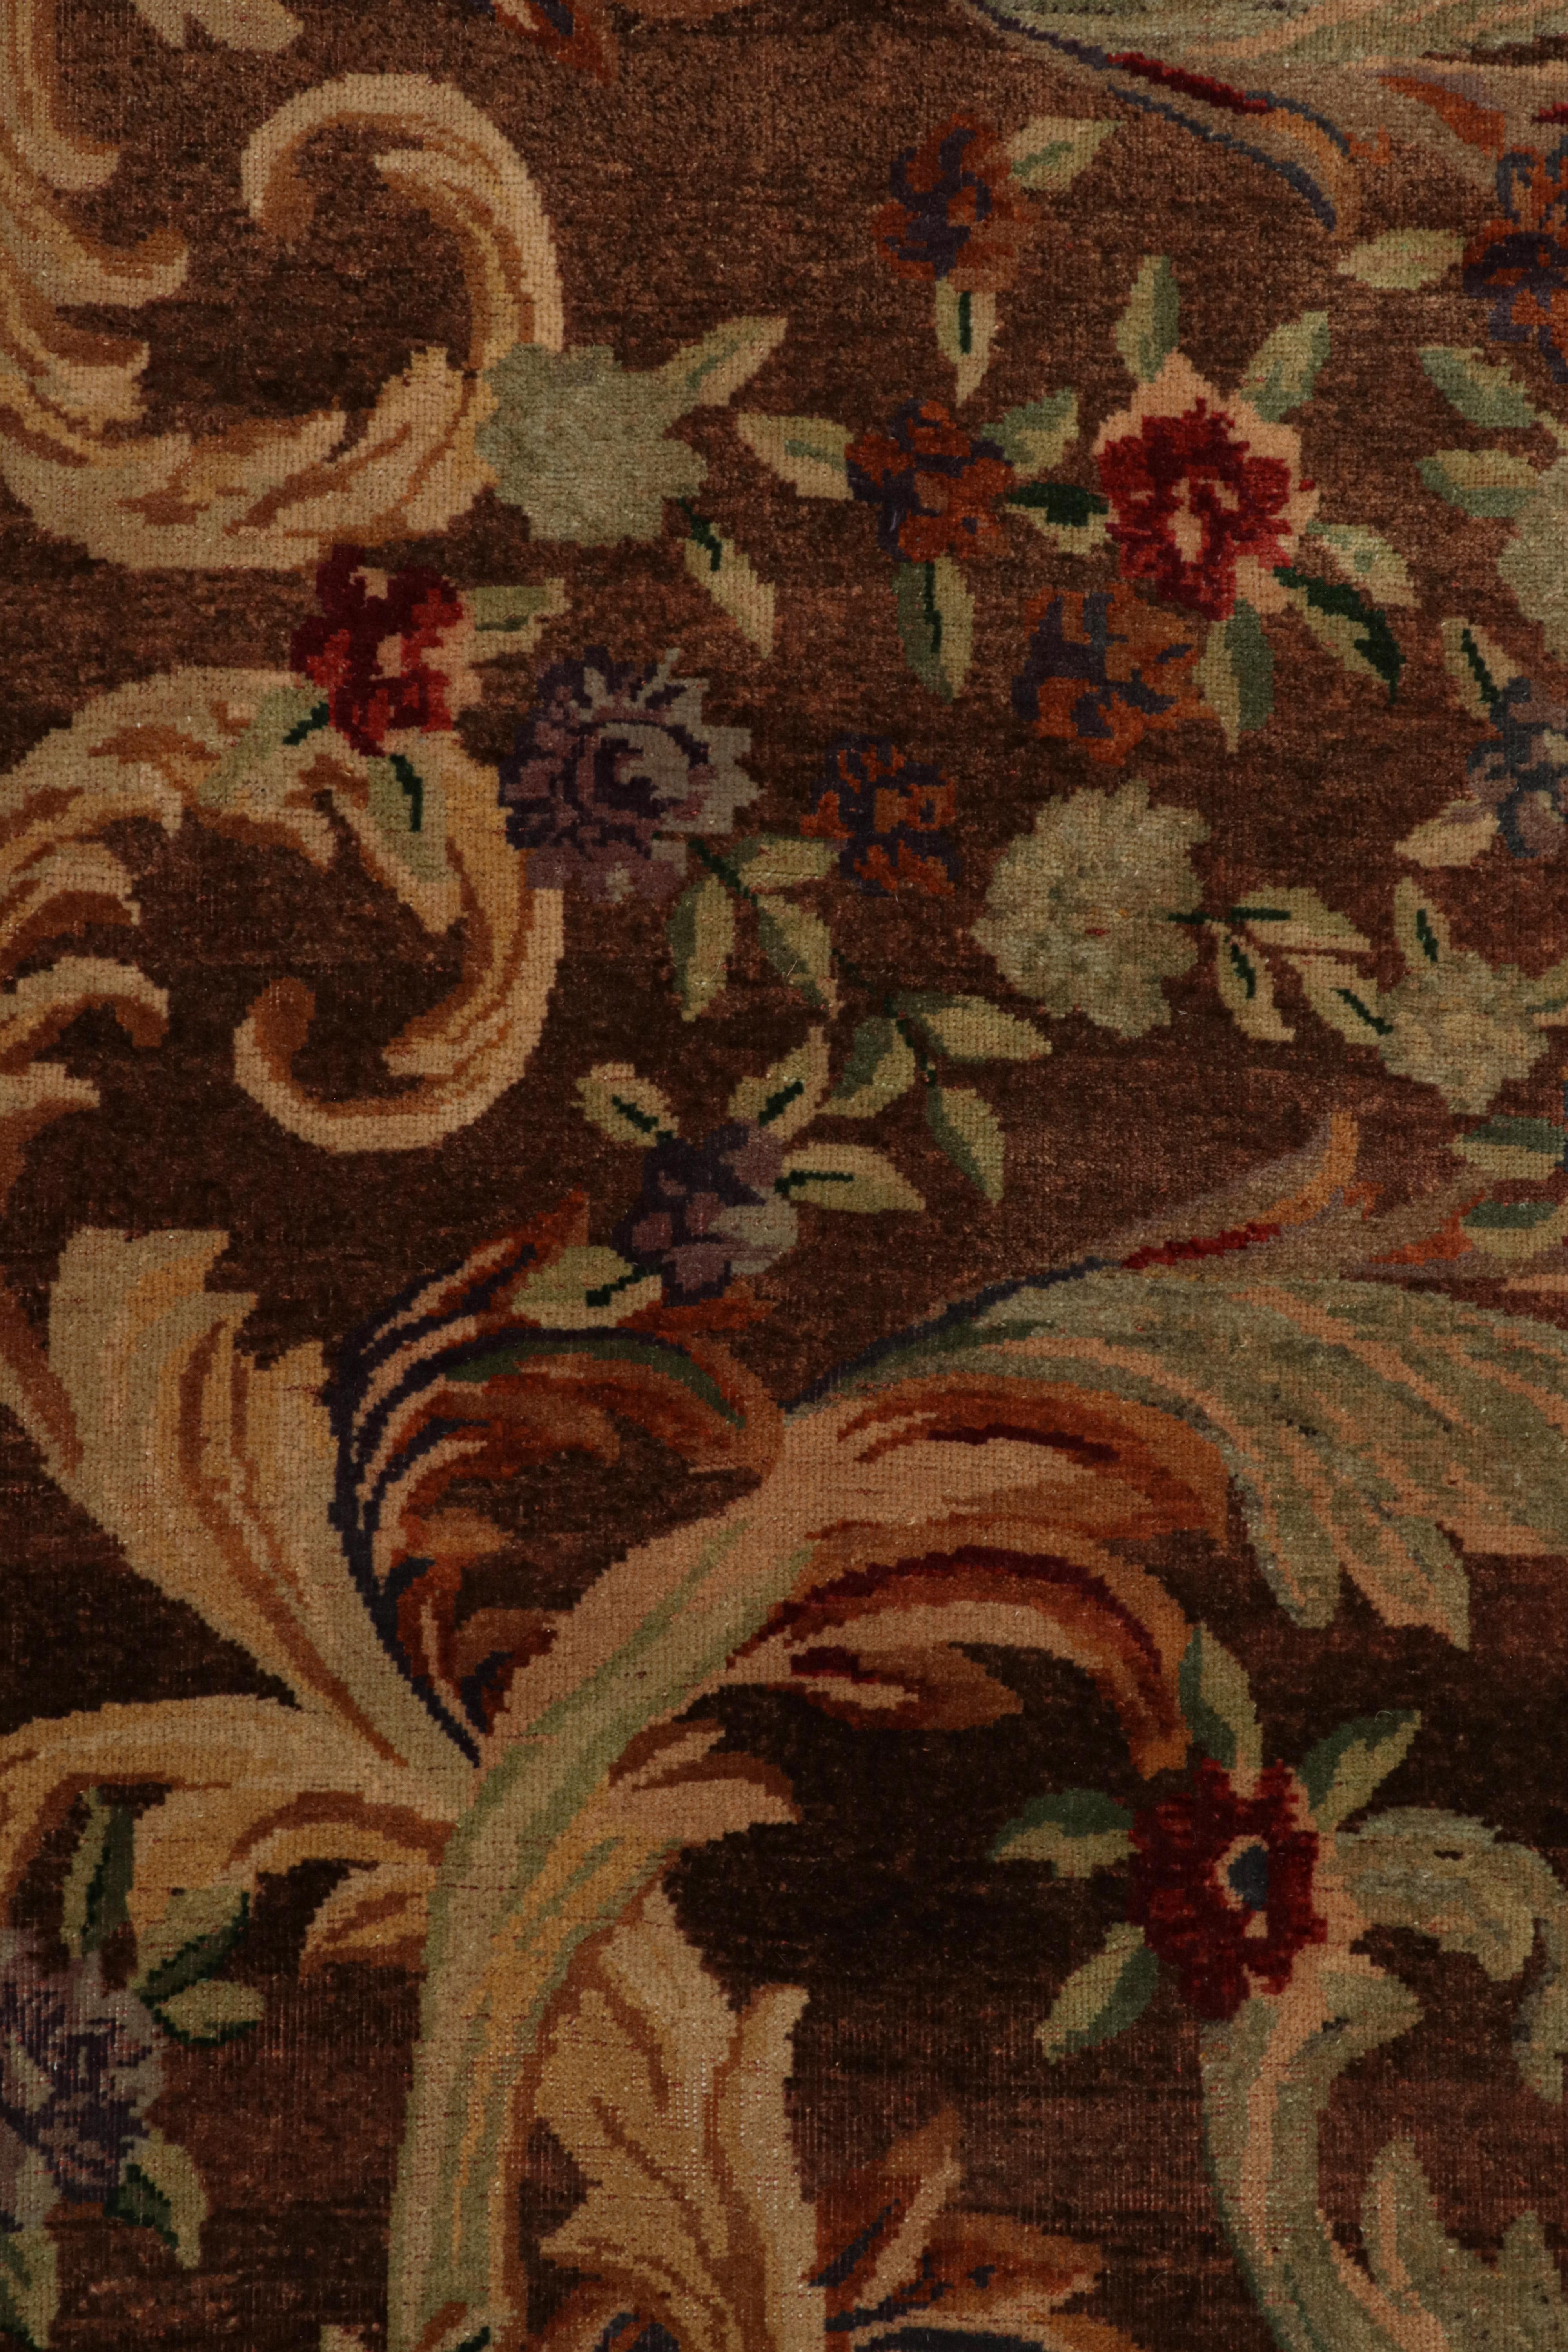 Hand-Knotted Vintage French Savonnerie Rug, in Brown, with Floral Patterns